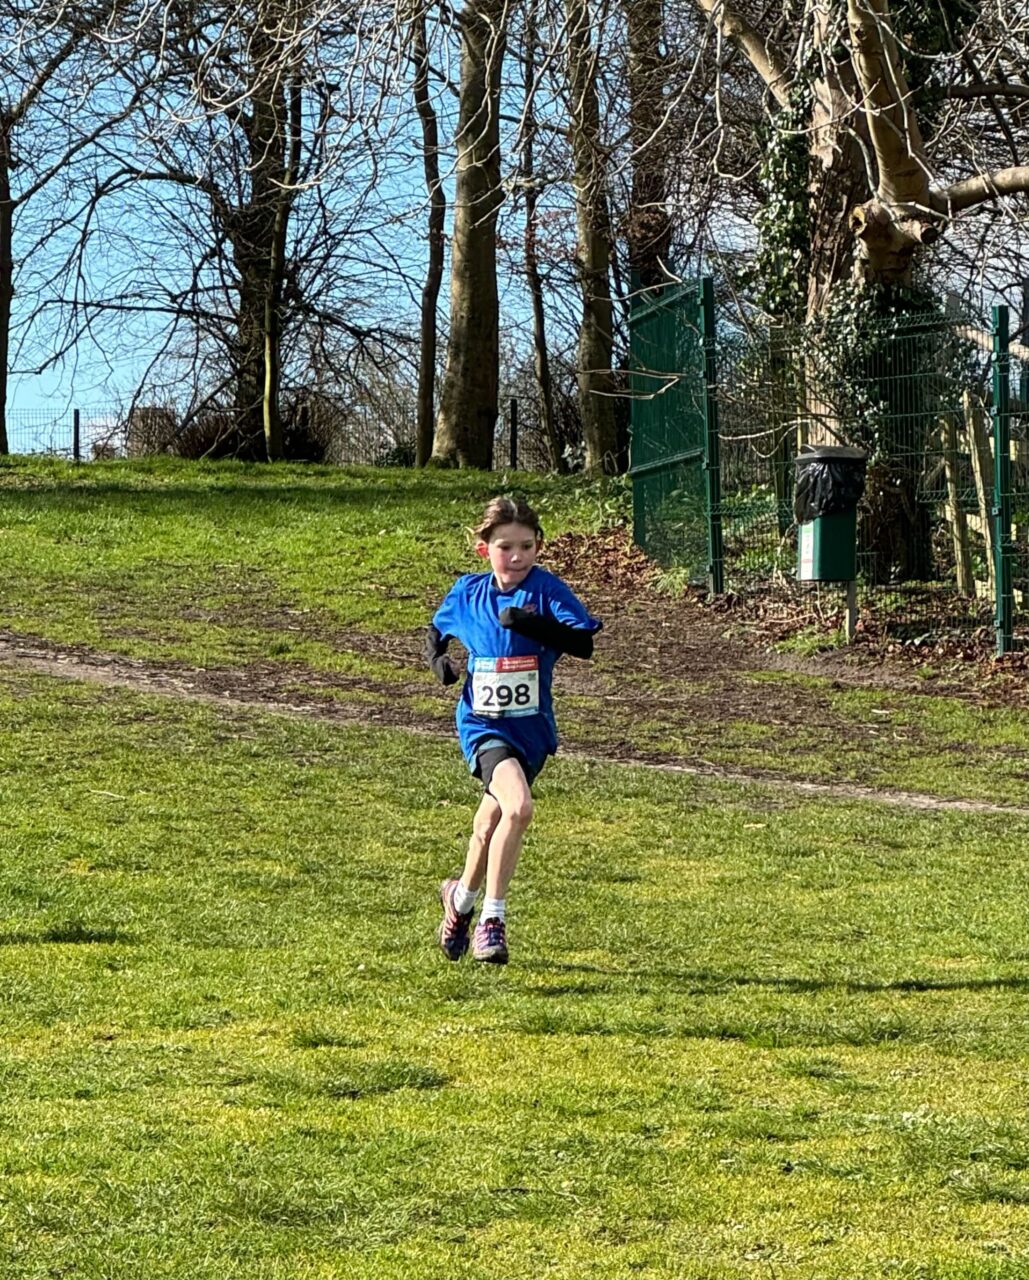 Theia R Cross Country Border League Event